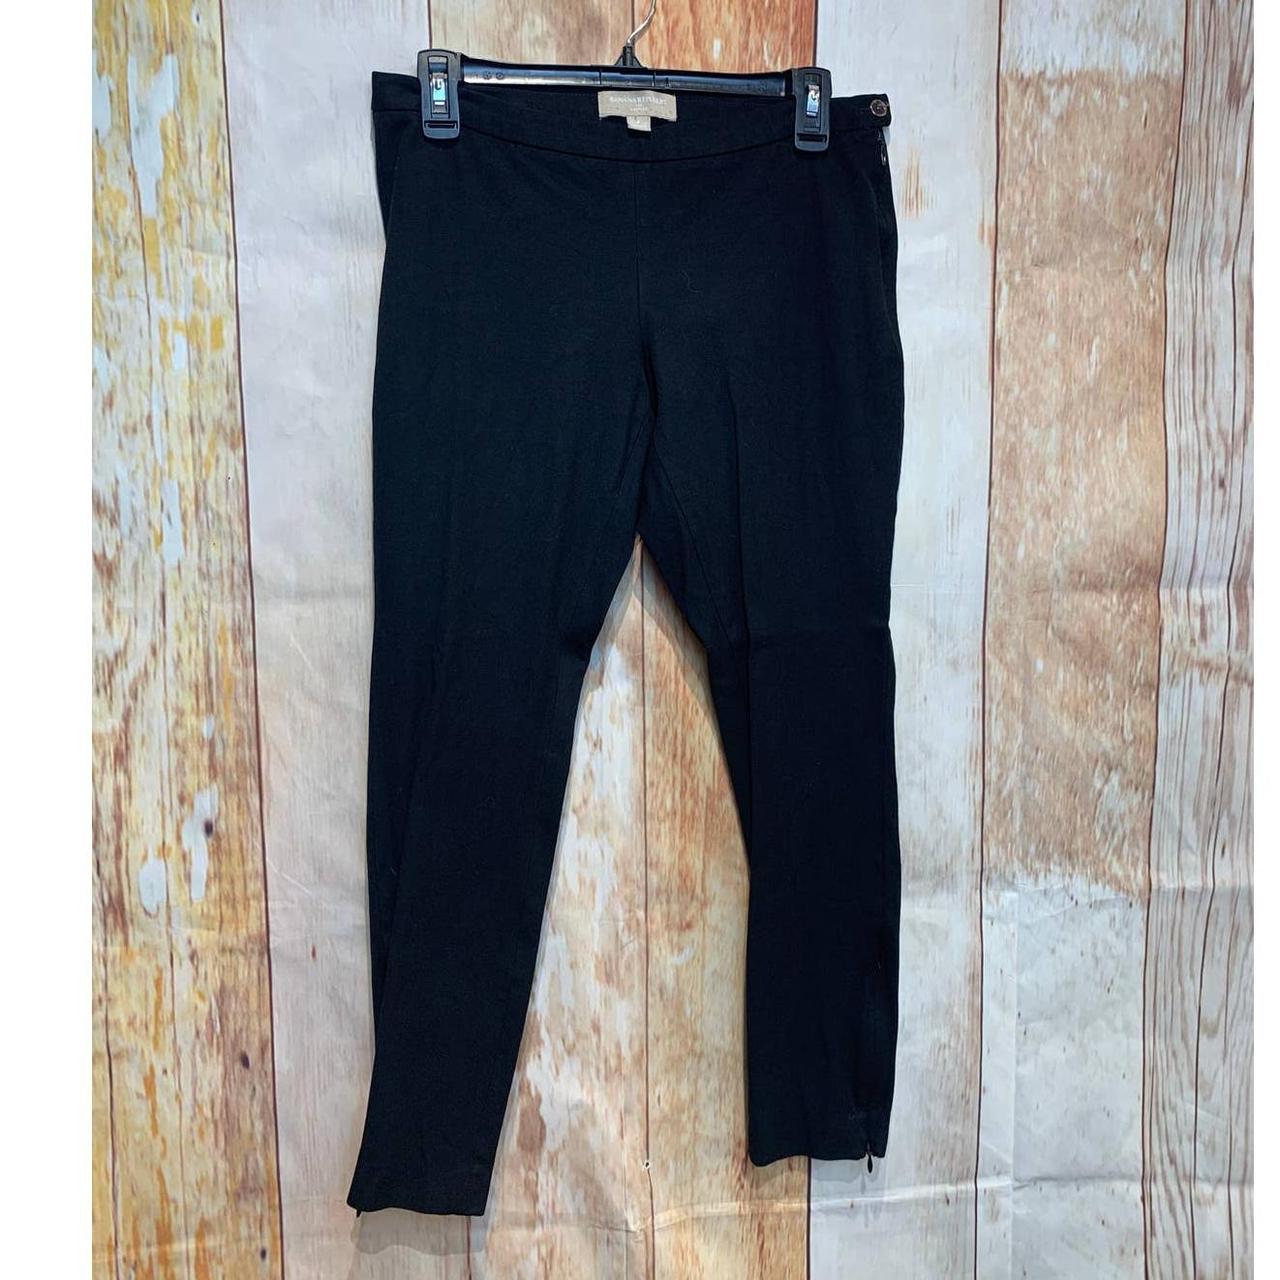 Women's Flat Front Casual Trousers, Casual Ladies Trouser, लेडीज कैजुअल  ट्राउजर - Urslook, Hyderabad | ID: 2853349907573